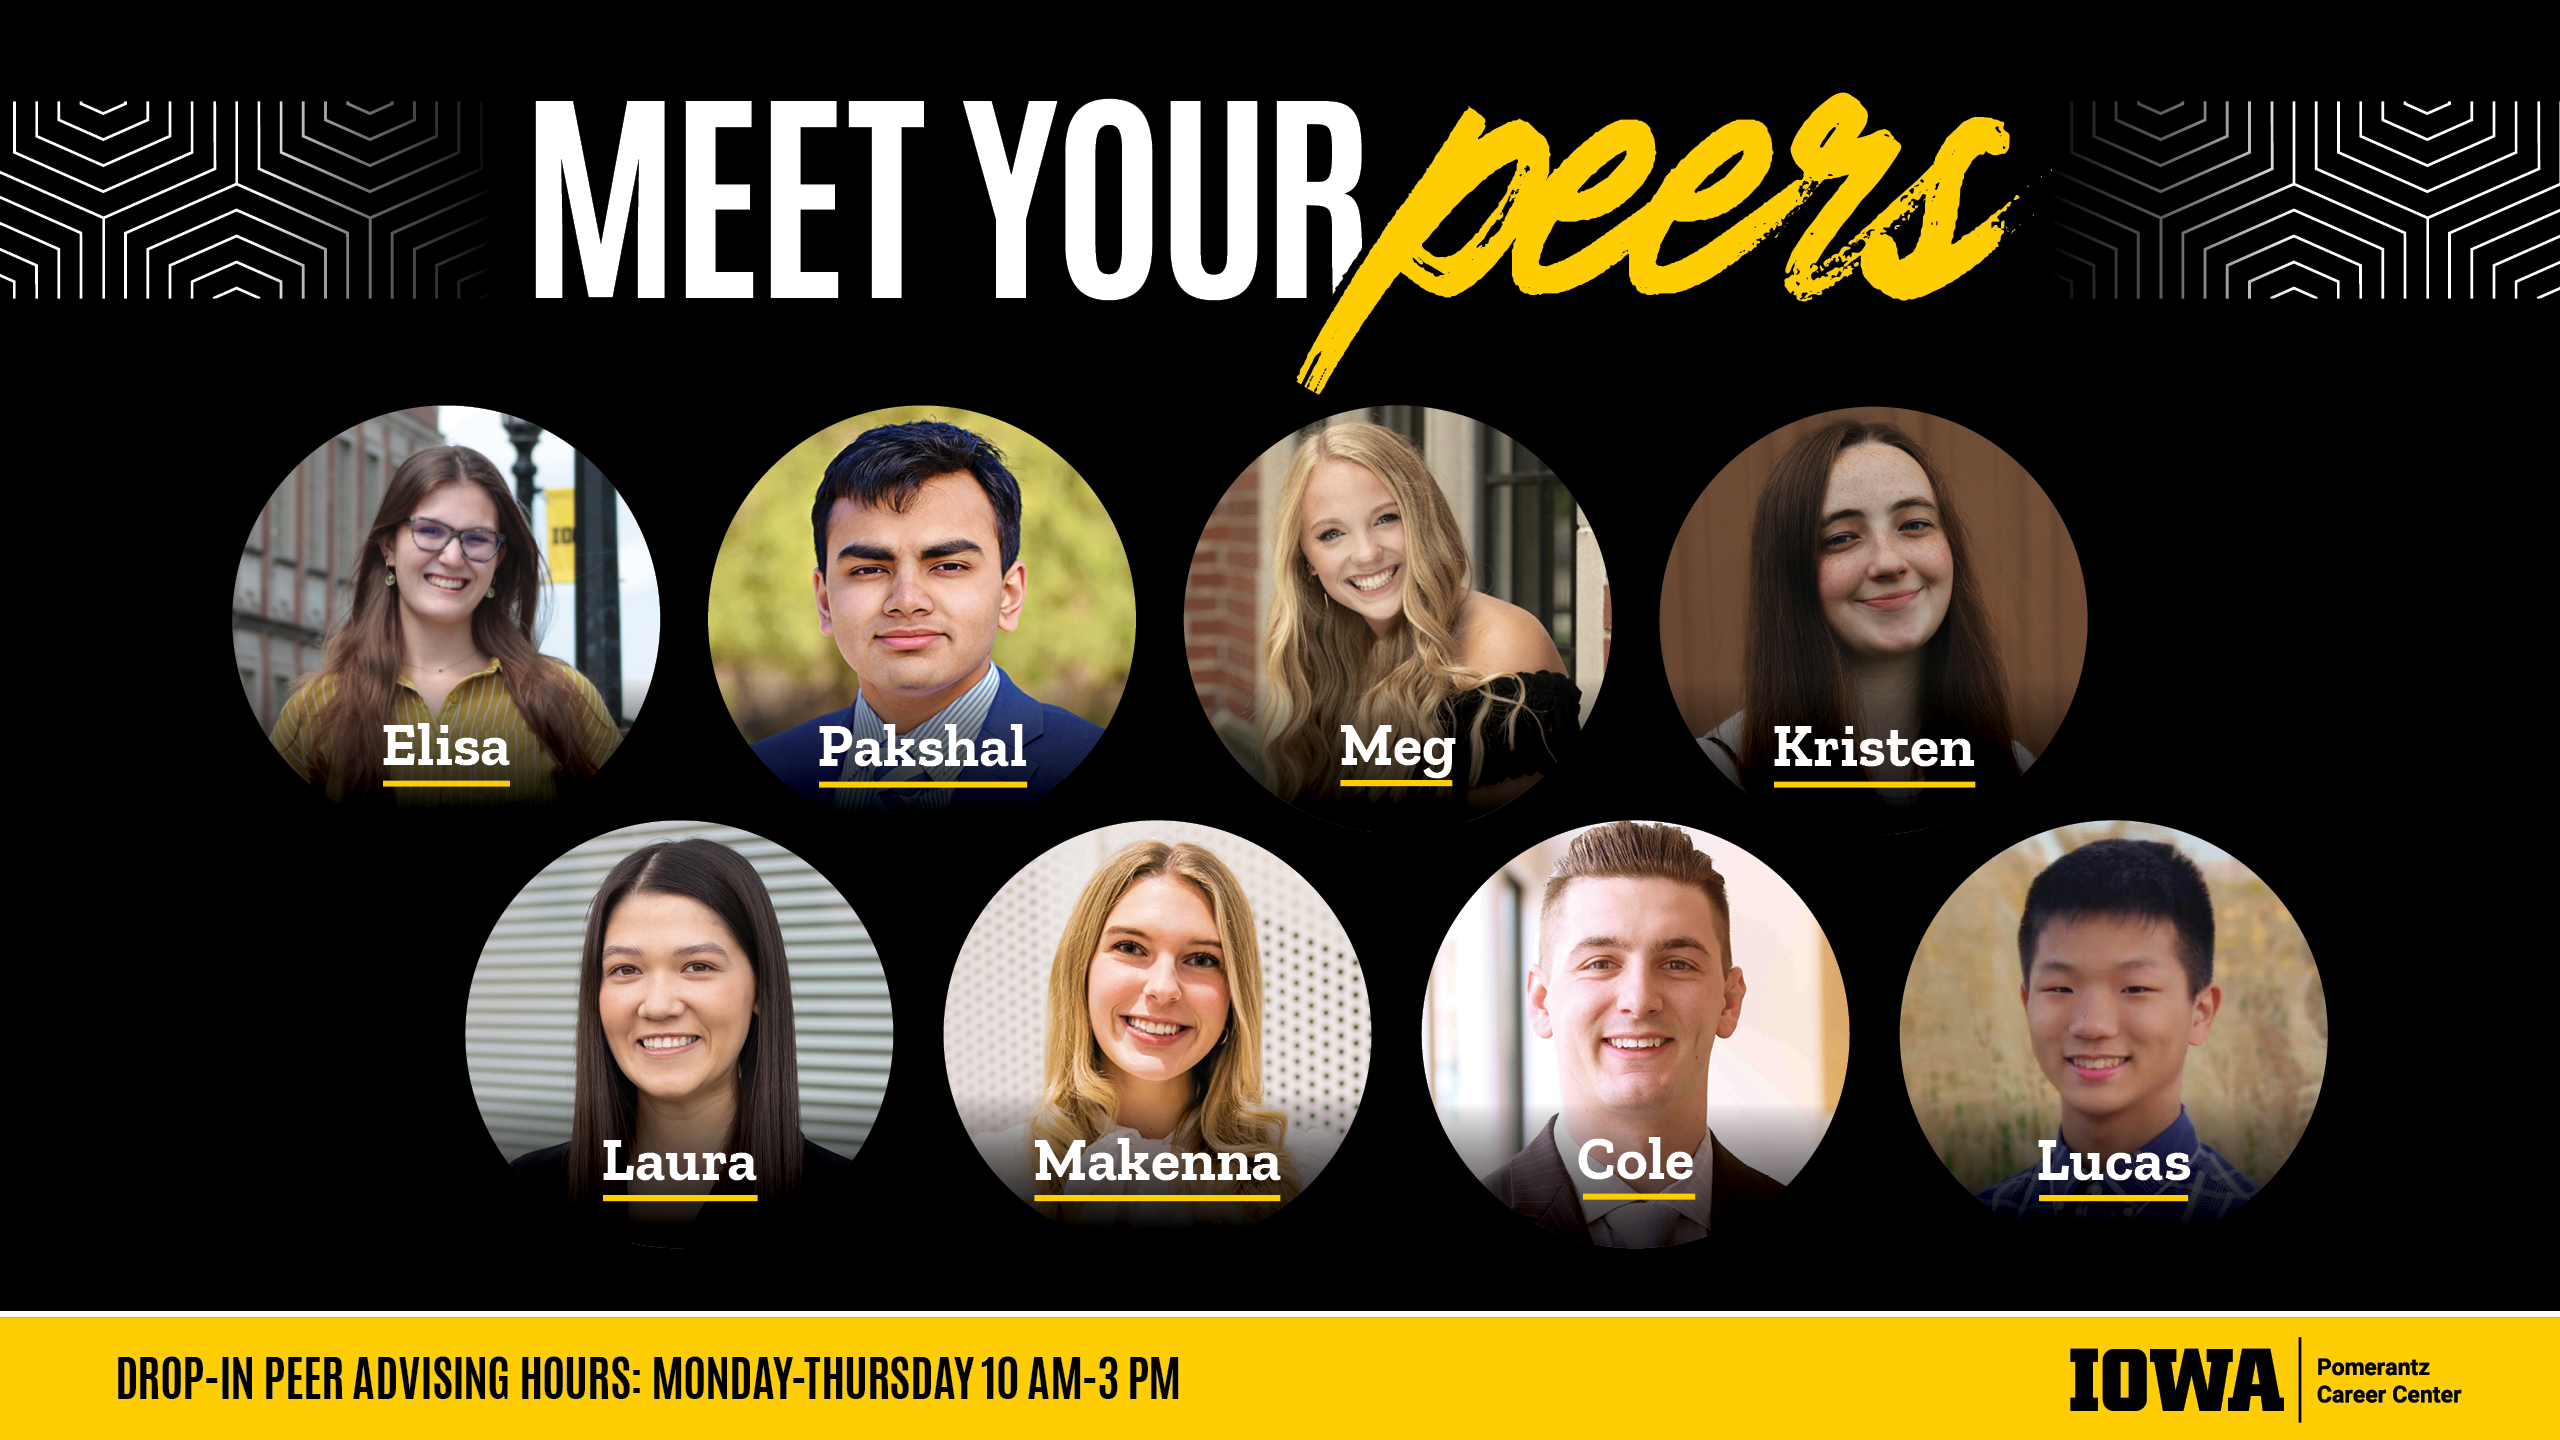 Meet Your Peers. Drop-in Advising Hours: Monday-Thursday 10am-3pm